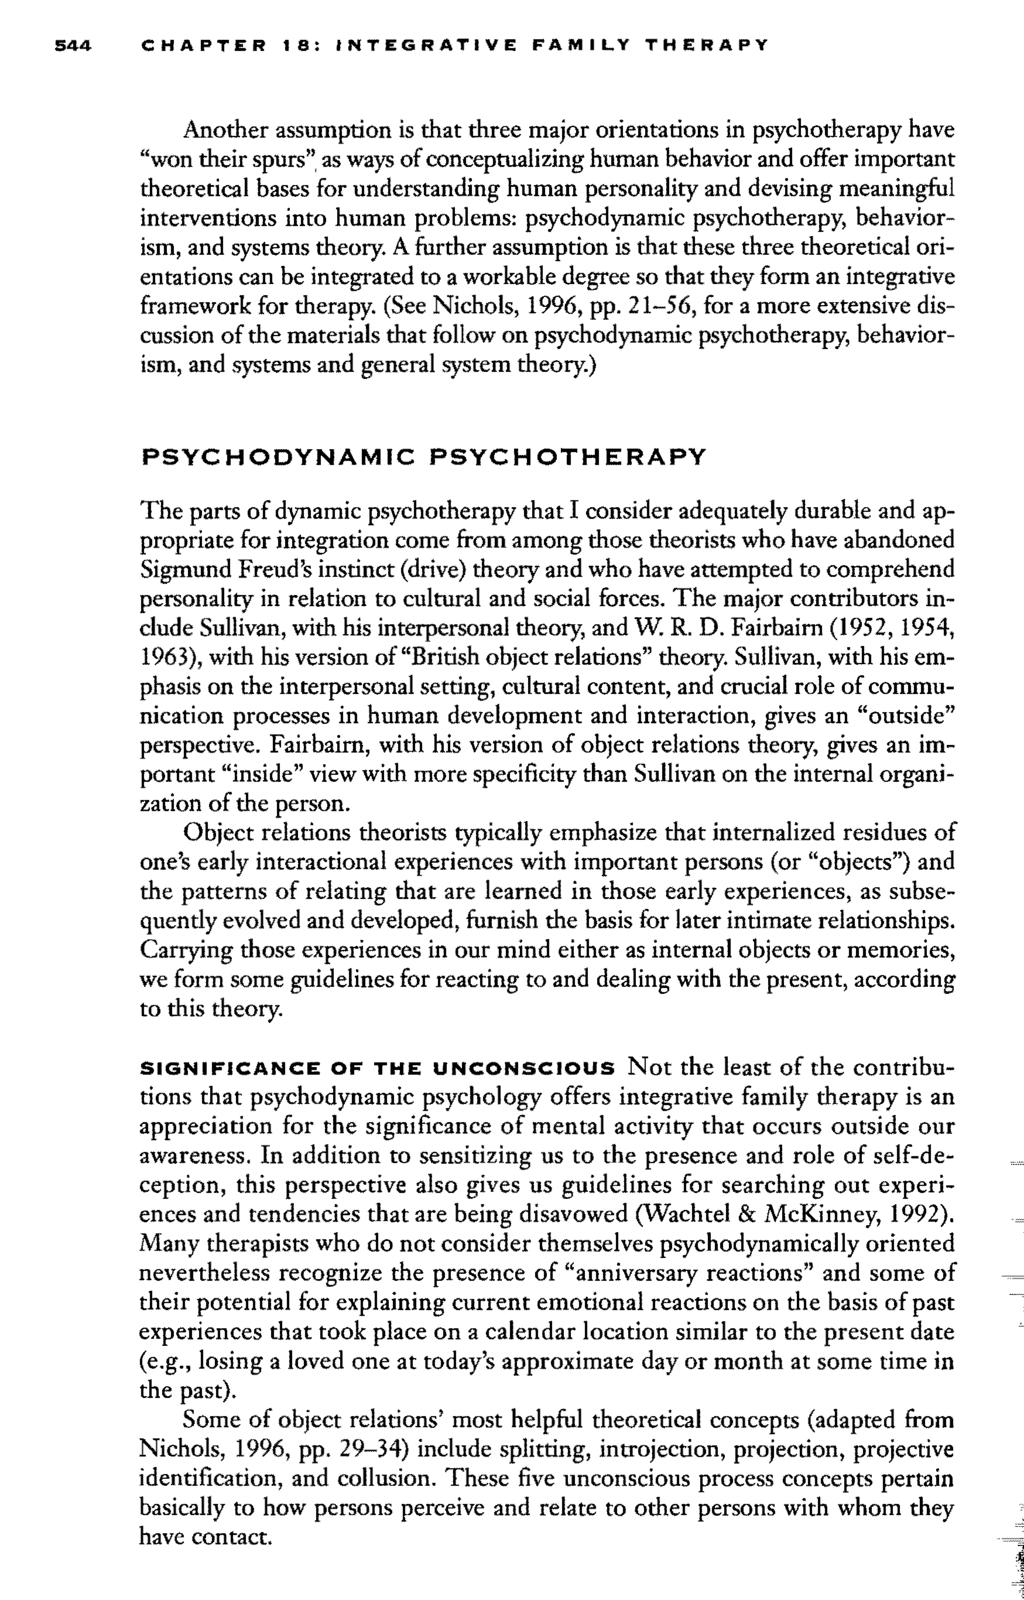 544 CHAPTER 18: INTEGRATIVE FAMILY THERAPY Another assumption is that three major orientations in psychotherapy have "won their spurs", as ways of conceptualizing human behavior and offer important